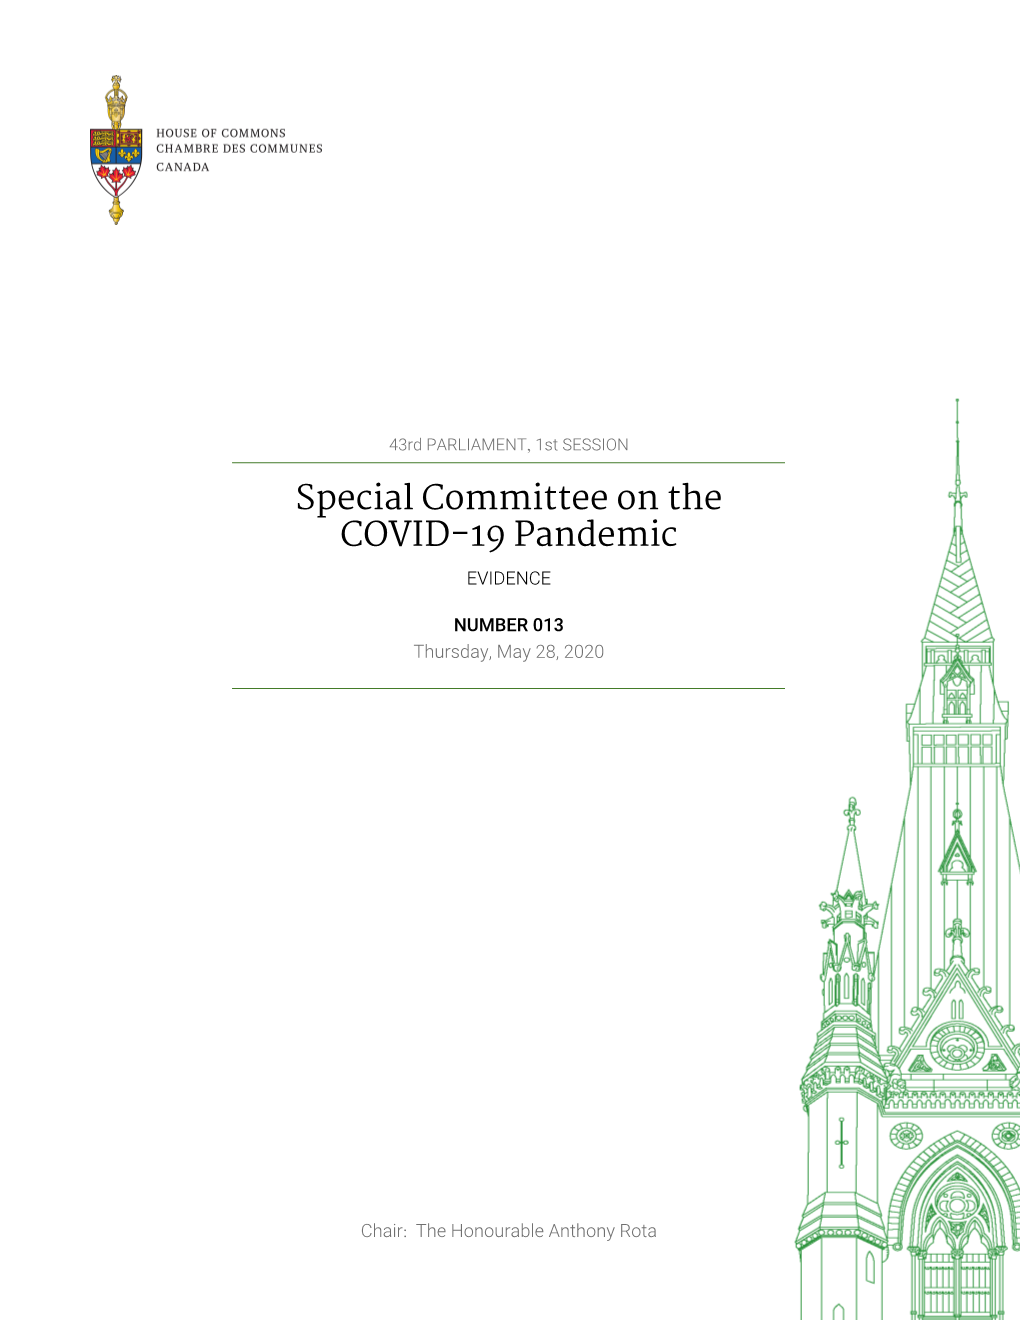 Evidence of the Special Committee on the COVID-19 Pandemic